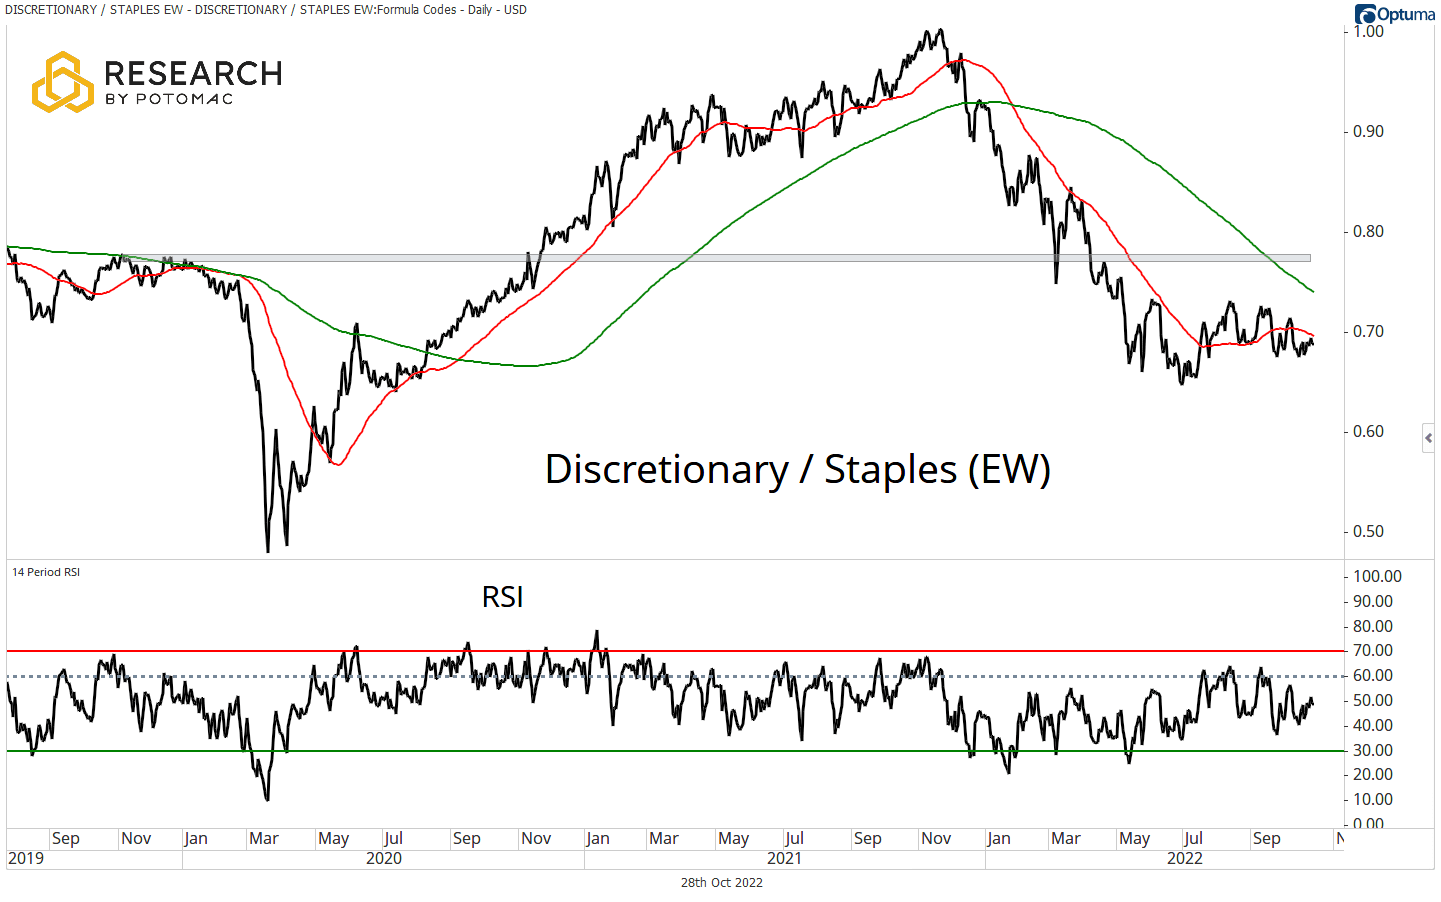 Discretionary / Staples (EW) chart for March 25th research.